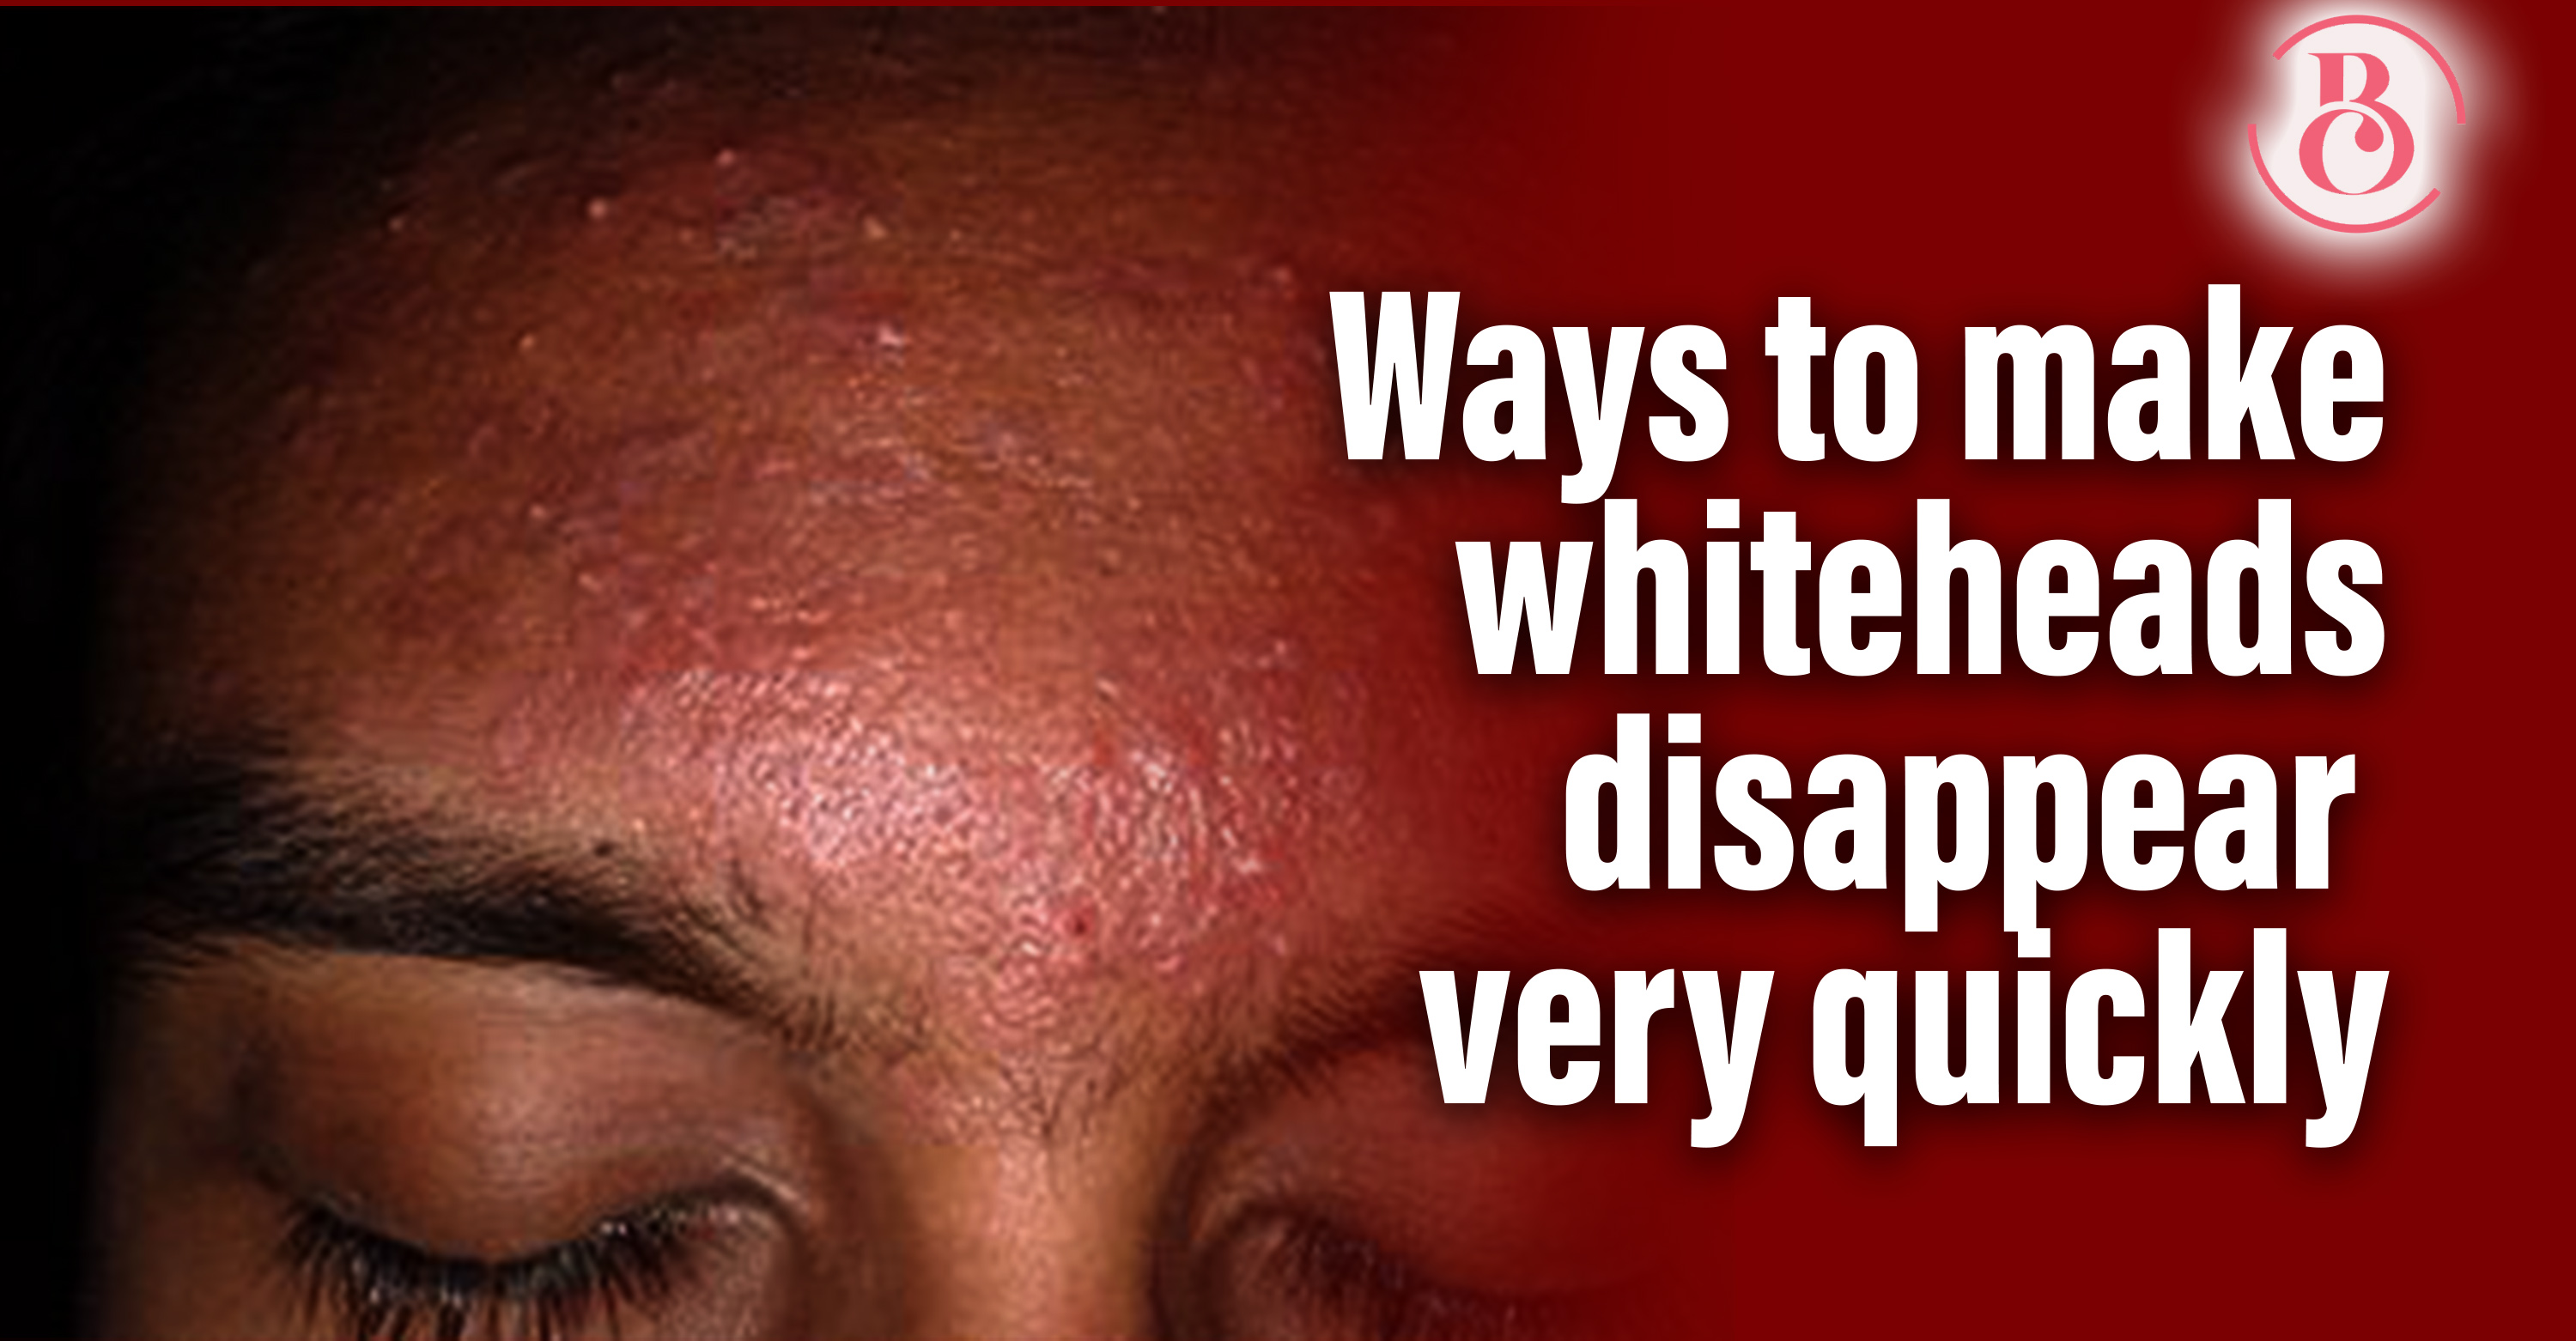 10 Ways to Make Whiteheads Disappear Very Quickly